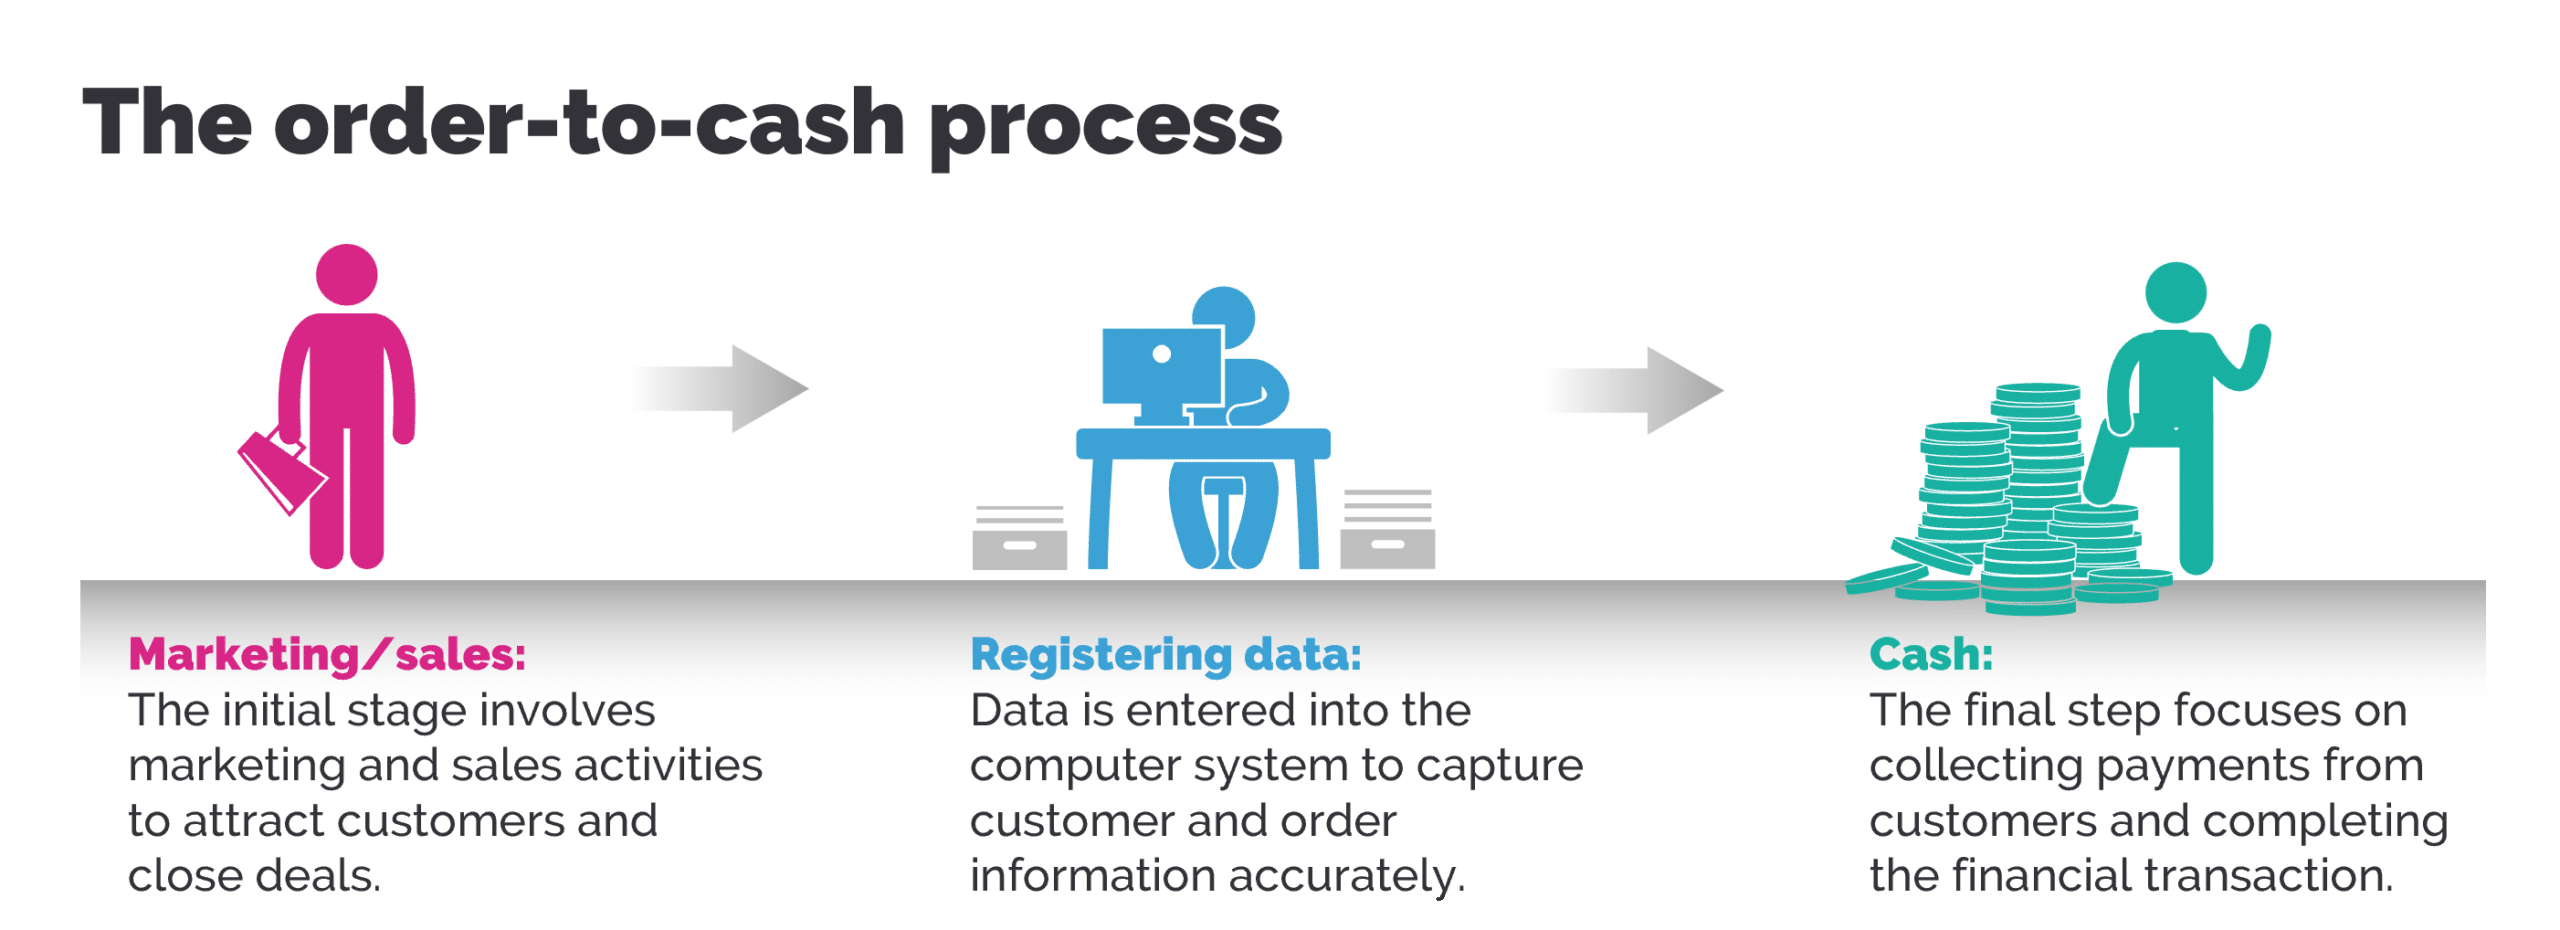 The order-to-cash process 